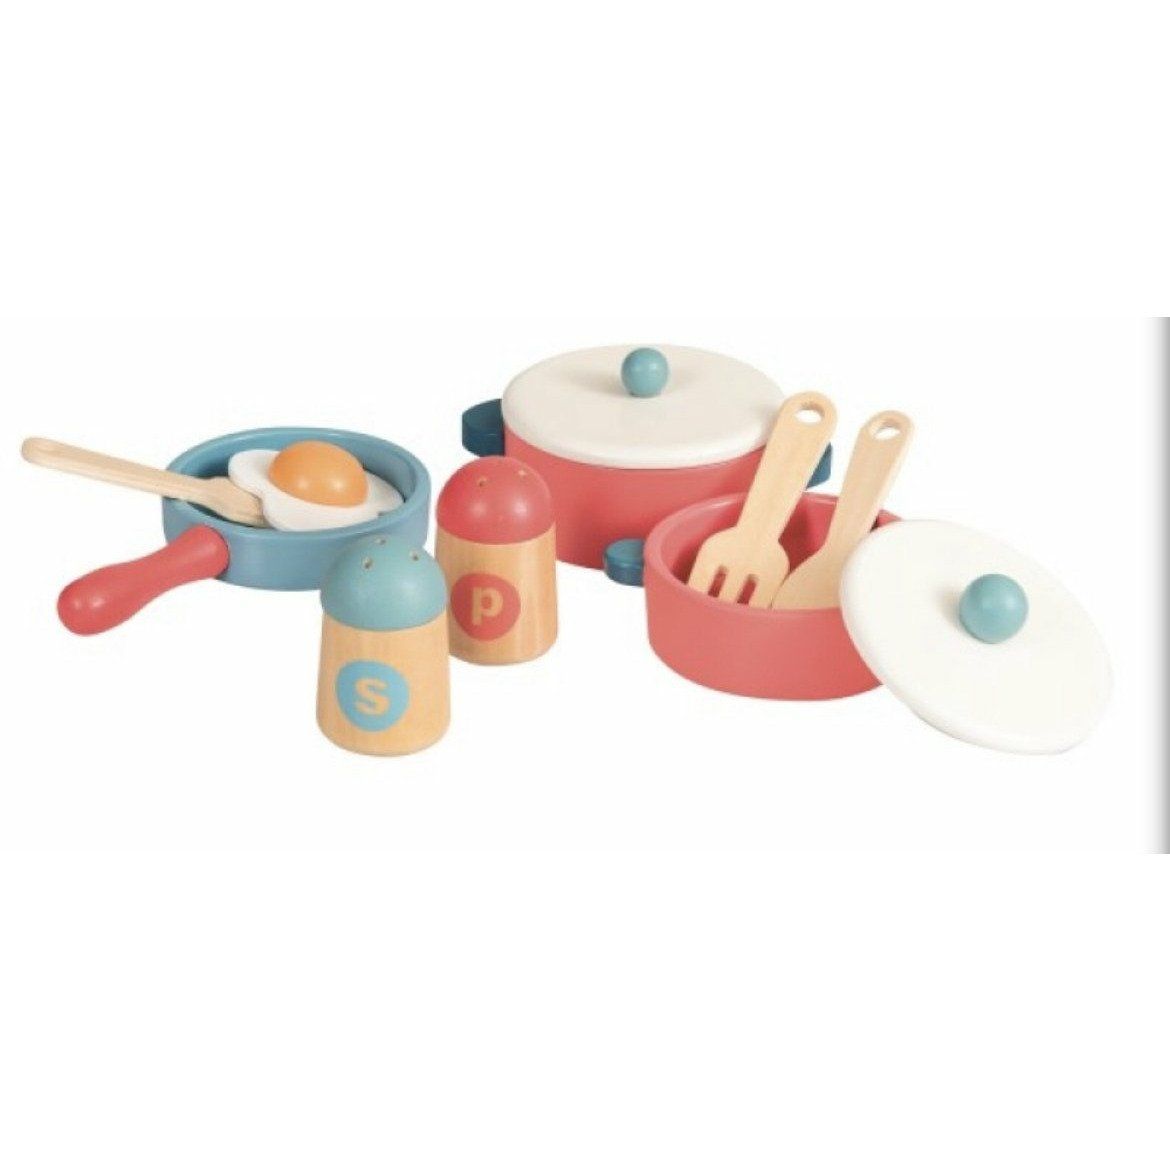 Wooden Pan Set for Pretend Play Kitchen